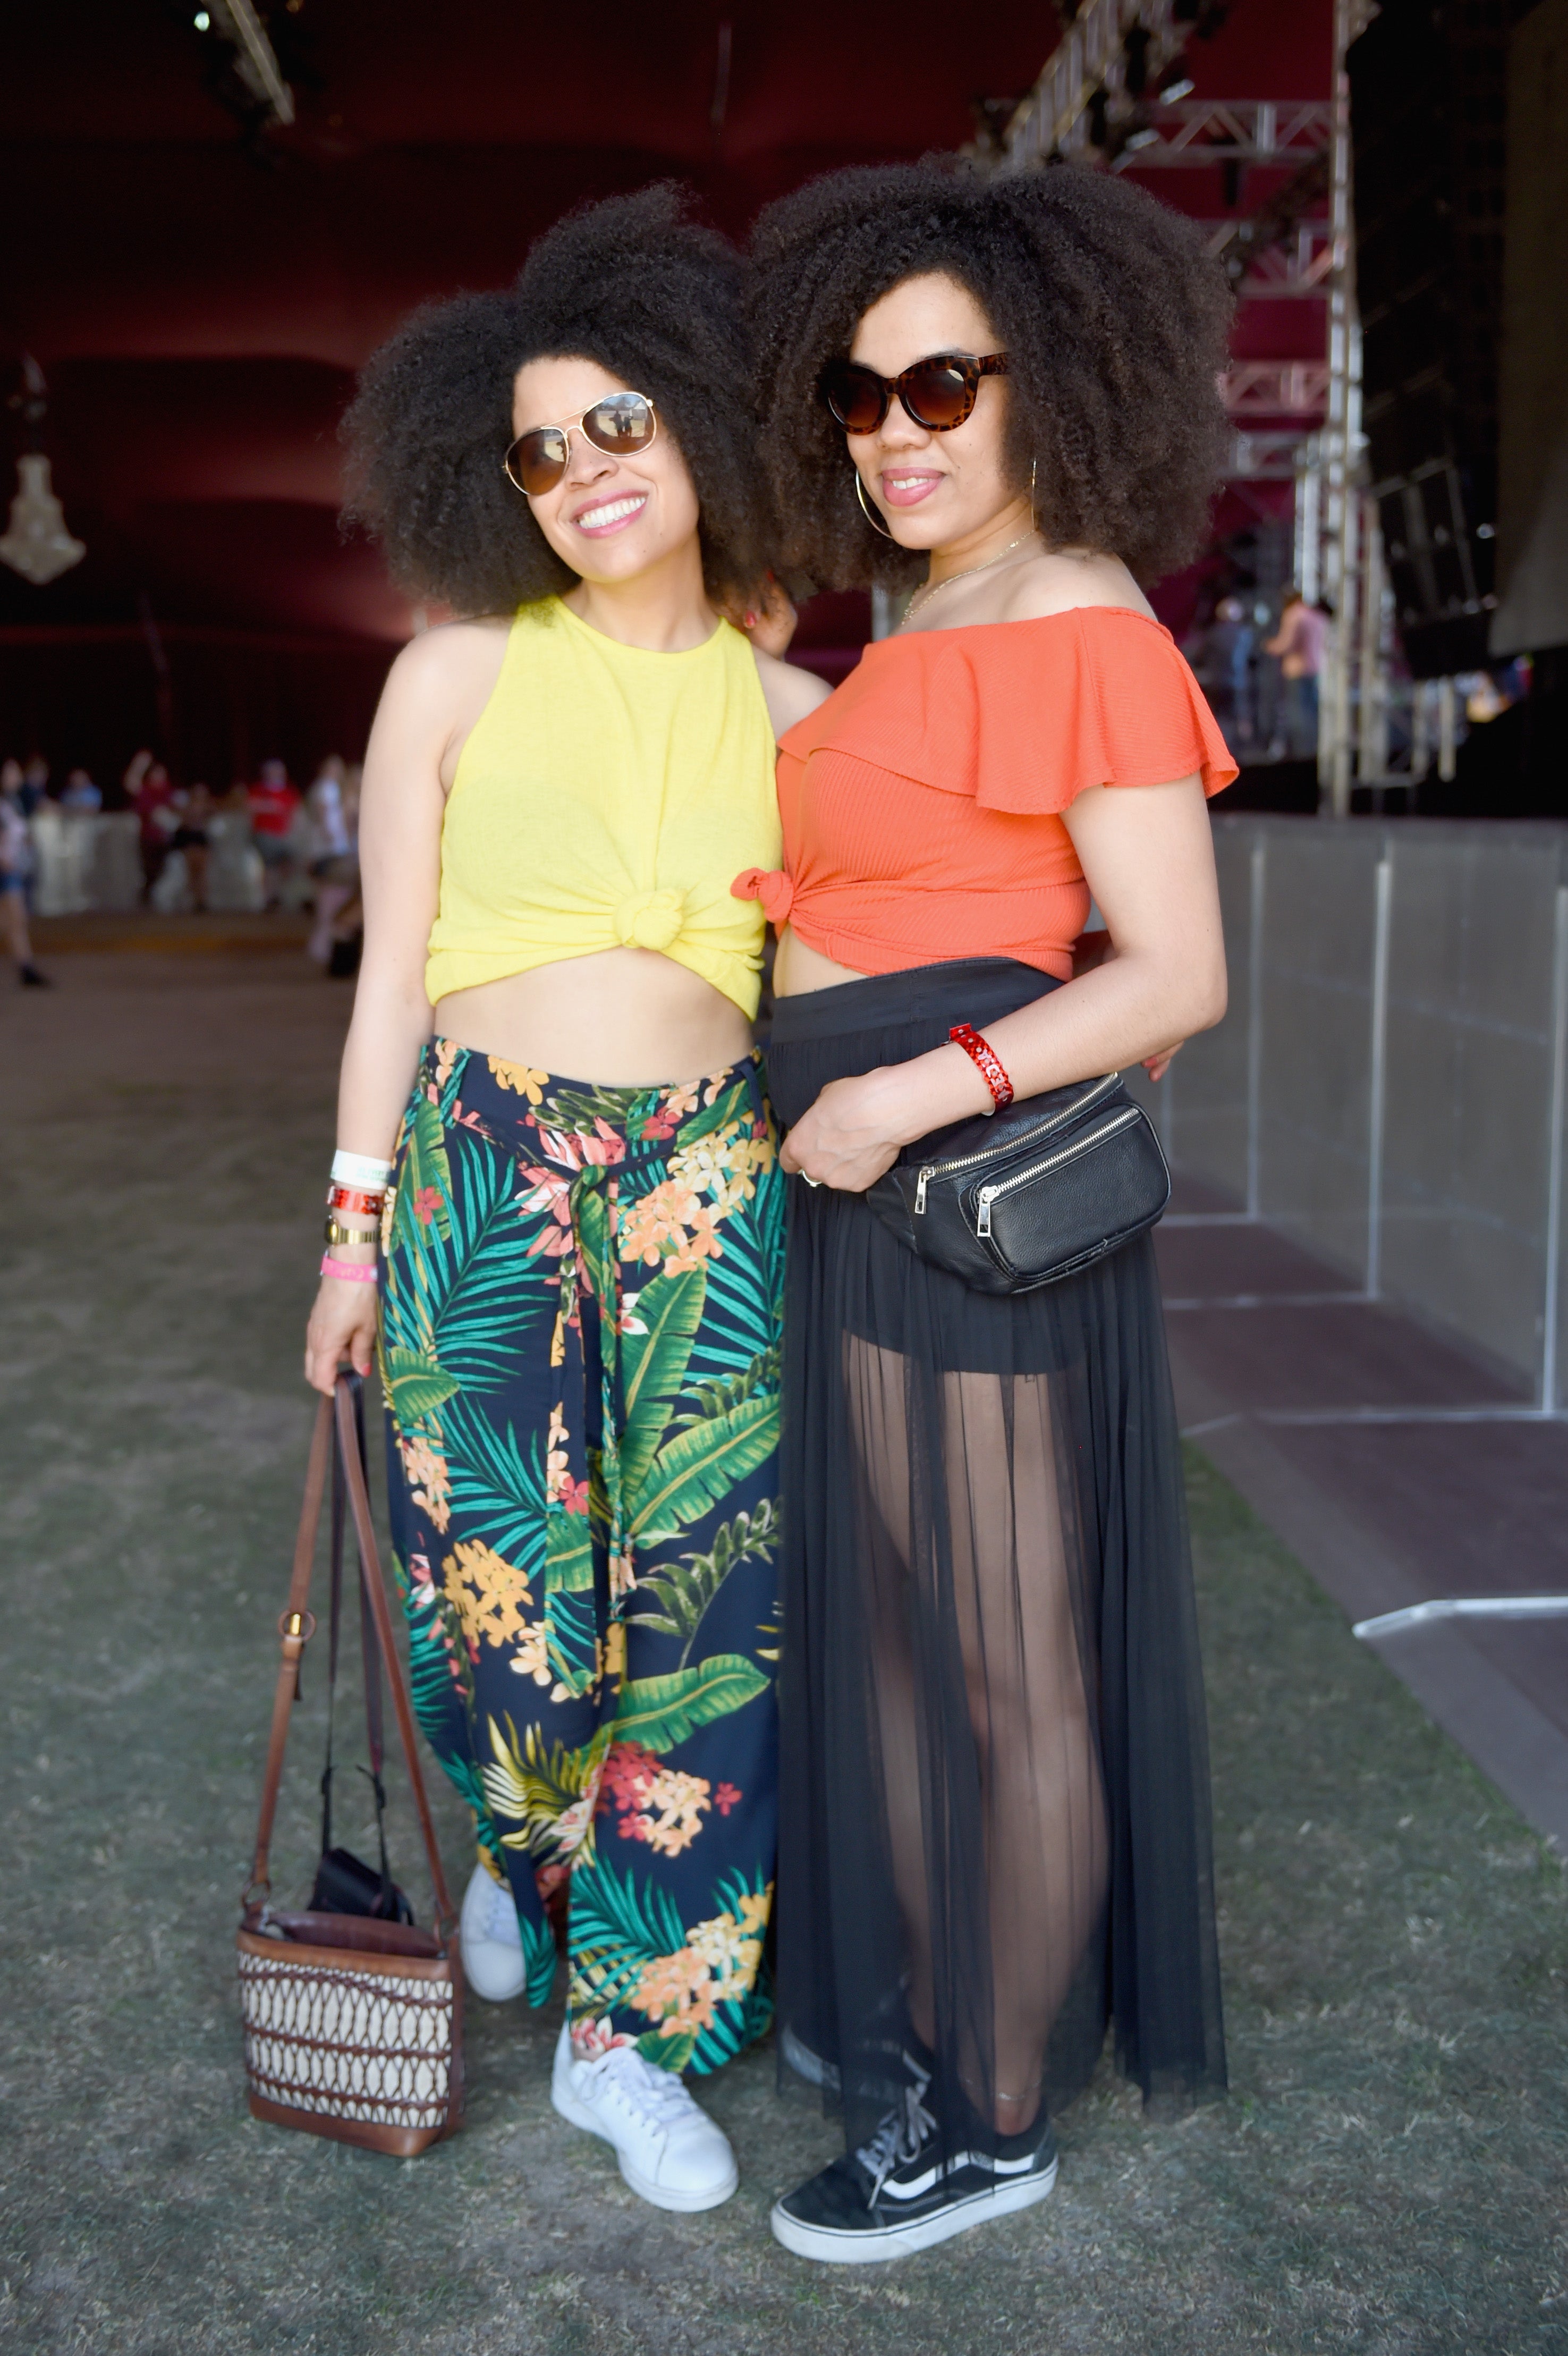 Coachella 2017 Was All About Show-Stopping Street Style
